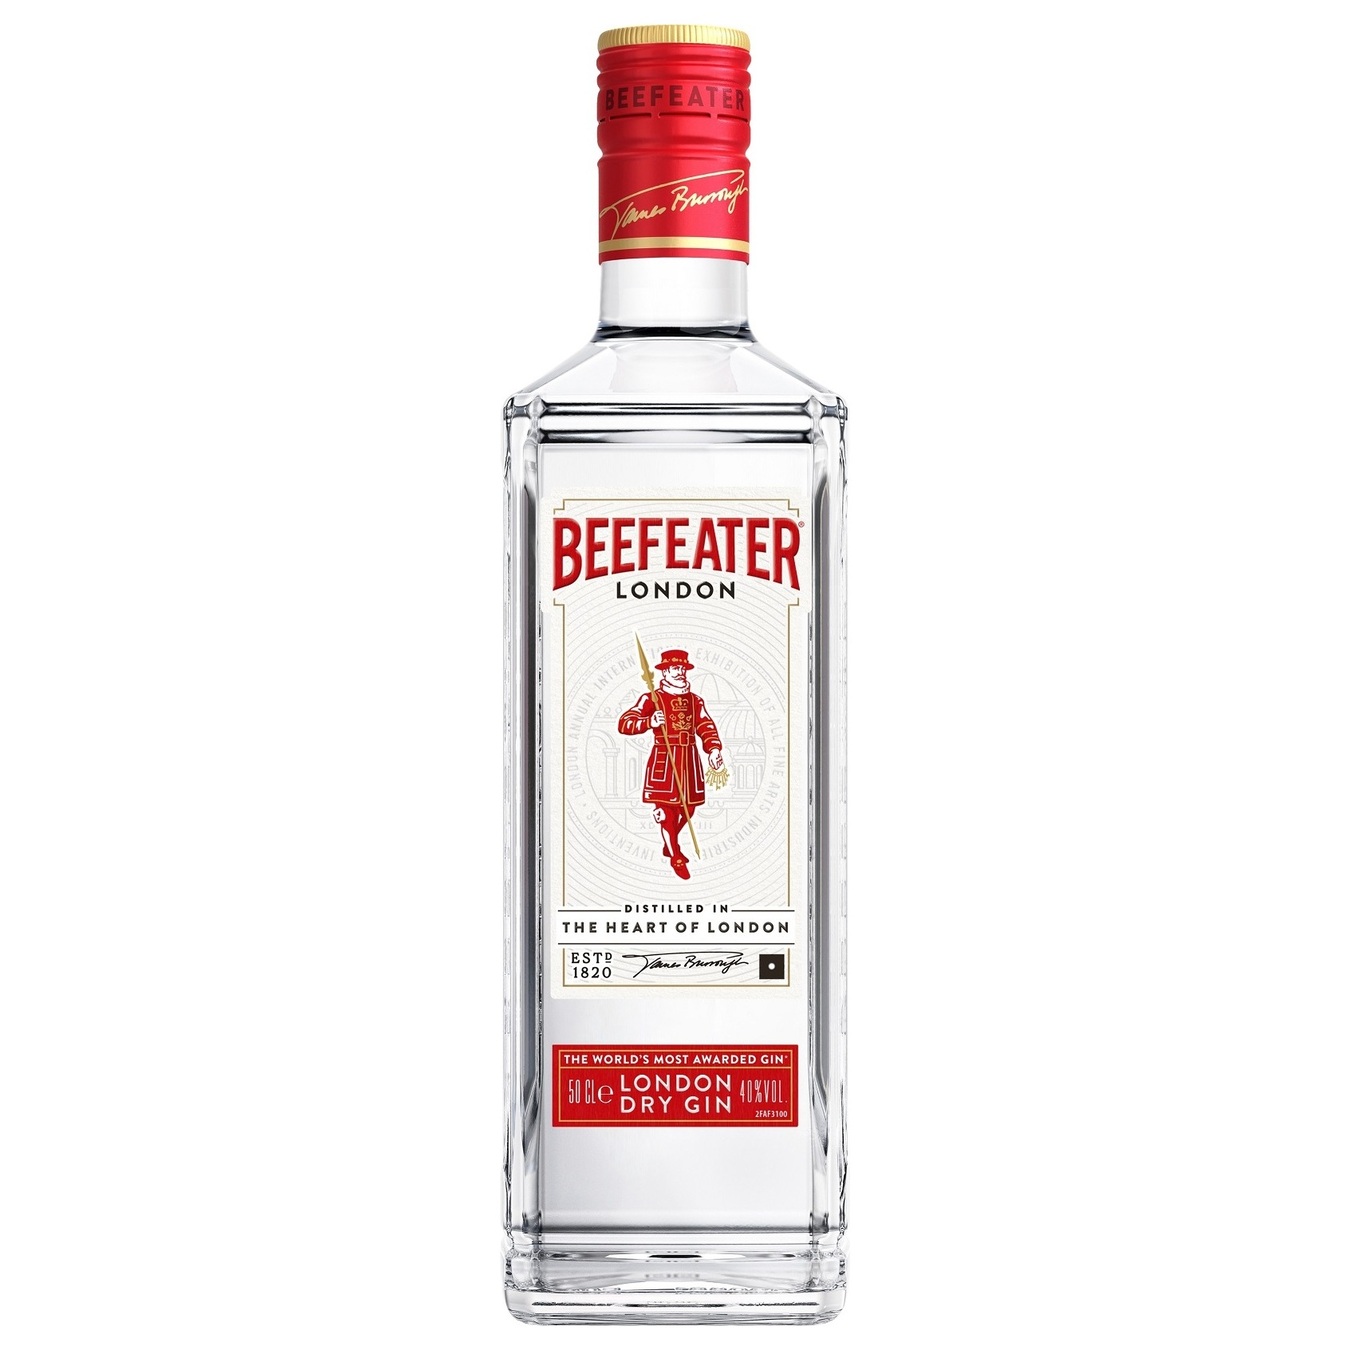 Gin Beefeater 40% 0,5l